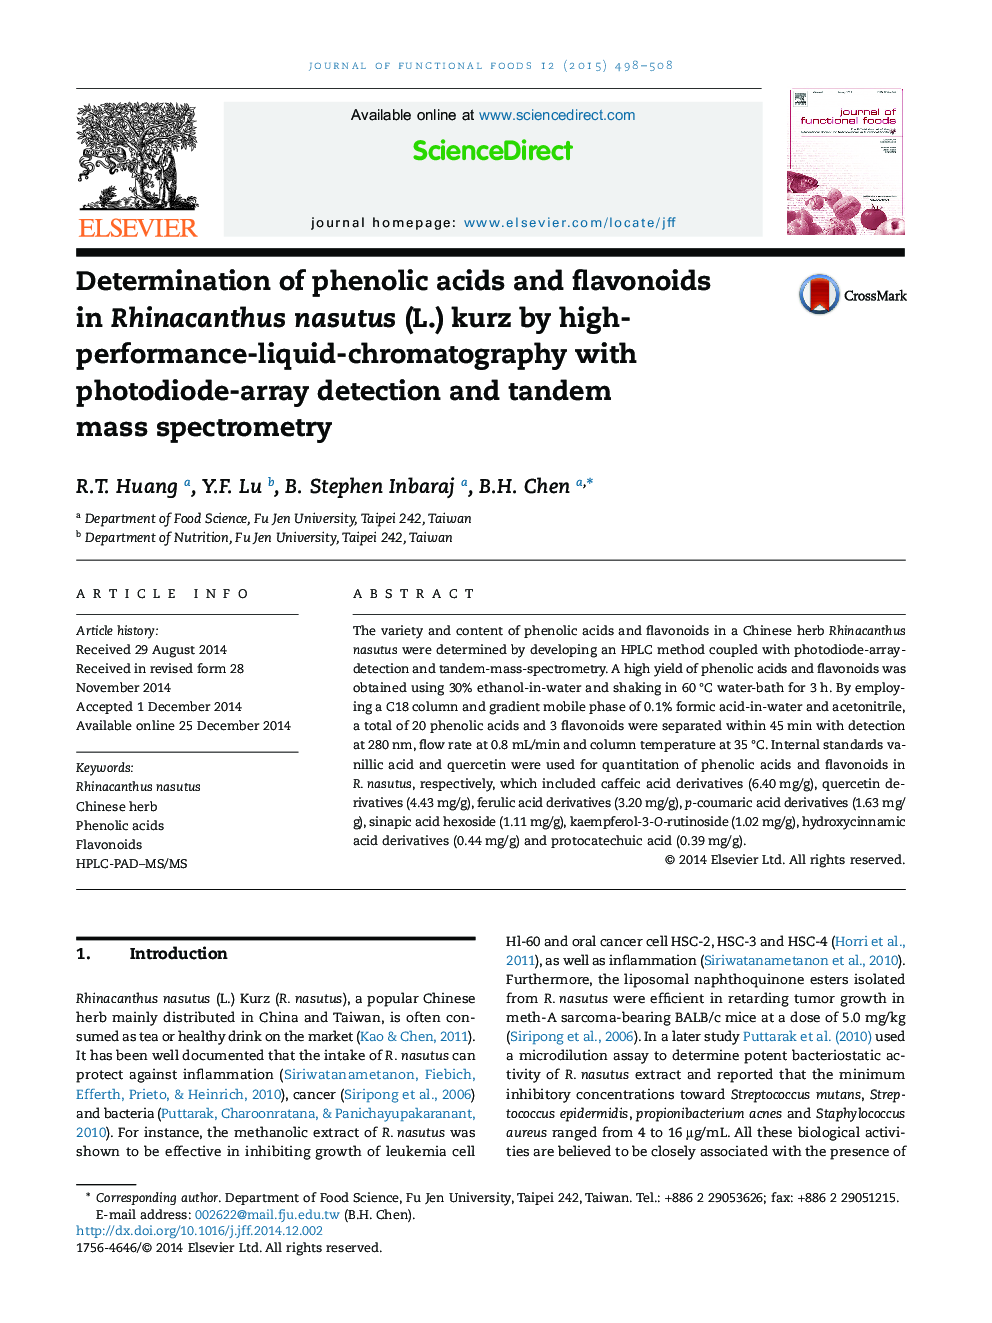 Determination of phenolic acids and flavonoids in Rhinacanthus nasutus (L.) kurz by high-performance-liquid-chromatography with photodiode-array detection and tandem mass spectrometry